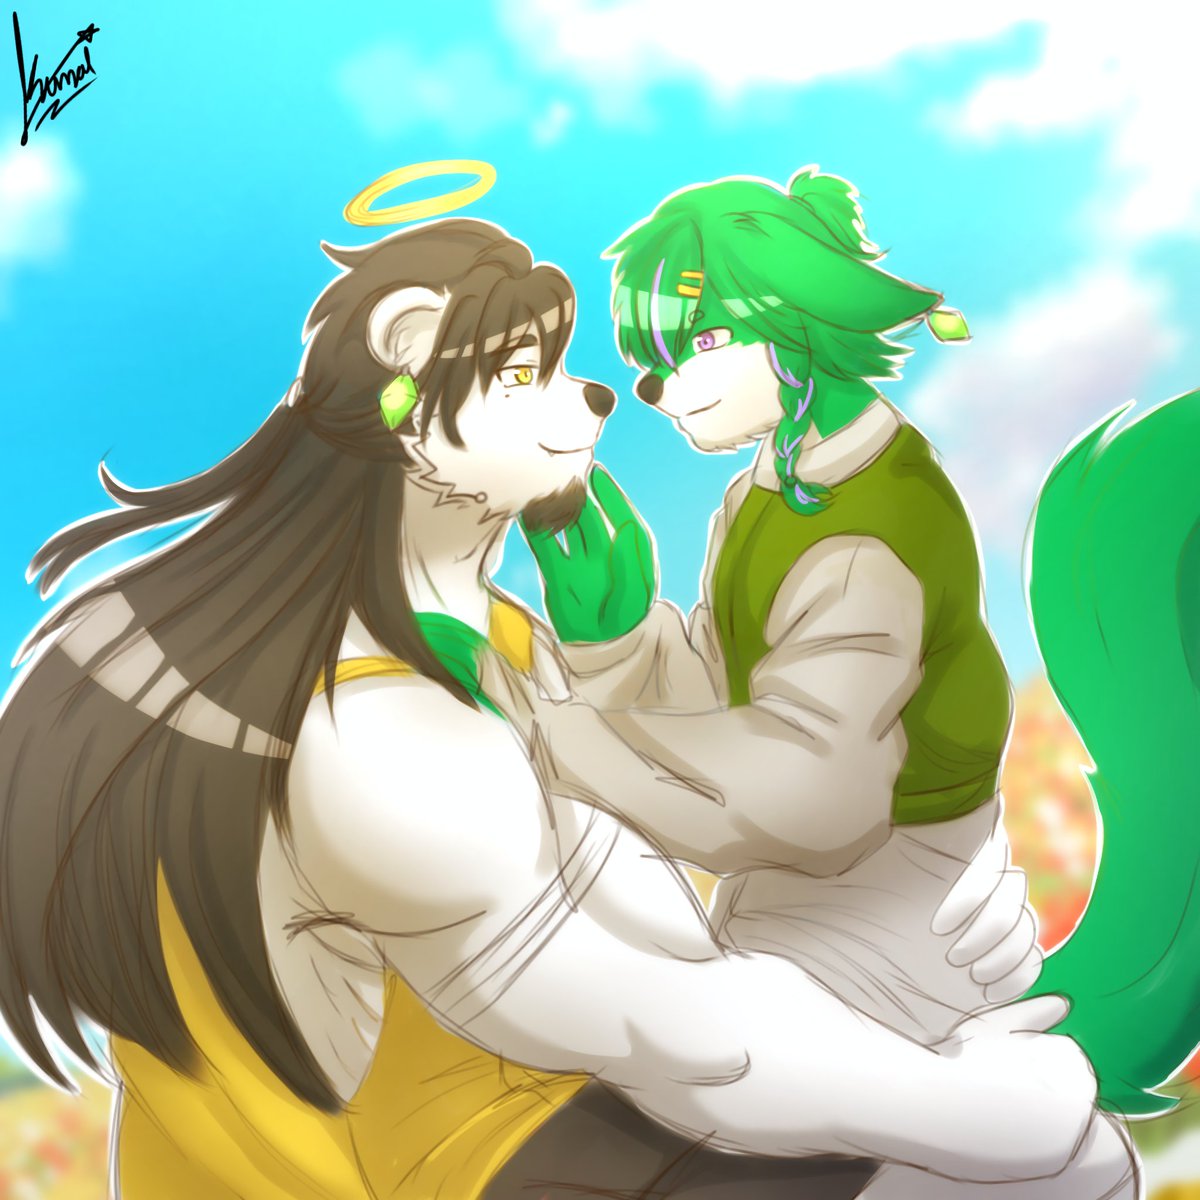 Late post for Couple Day 💛x💚
-
-
-
-
-
-
-
-
-
#furryart #furryfandom #furryartist #furrybara #furrydrawing #furry #furryindonesia